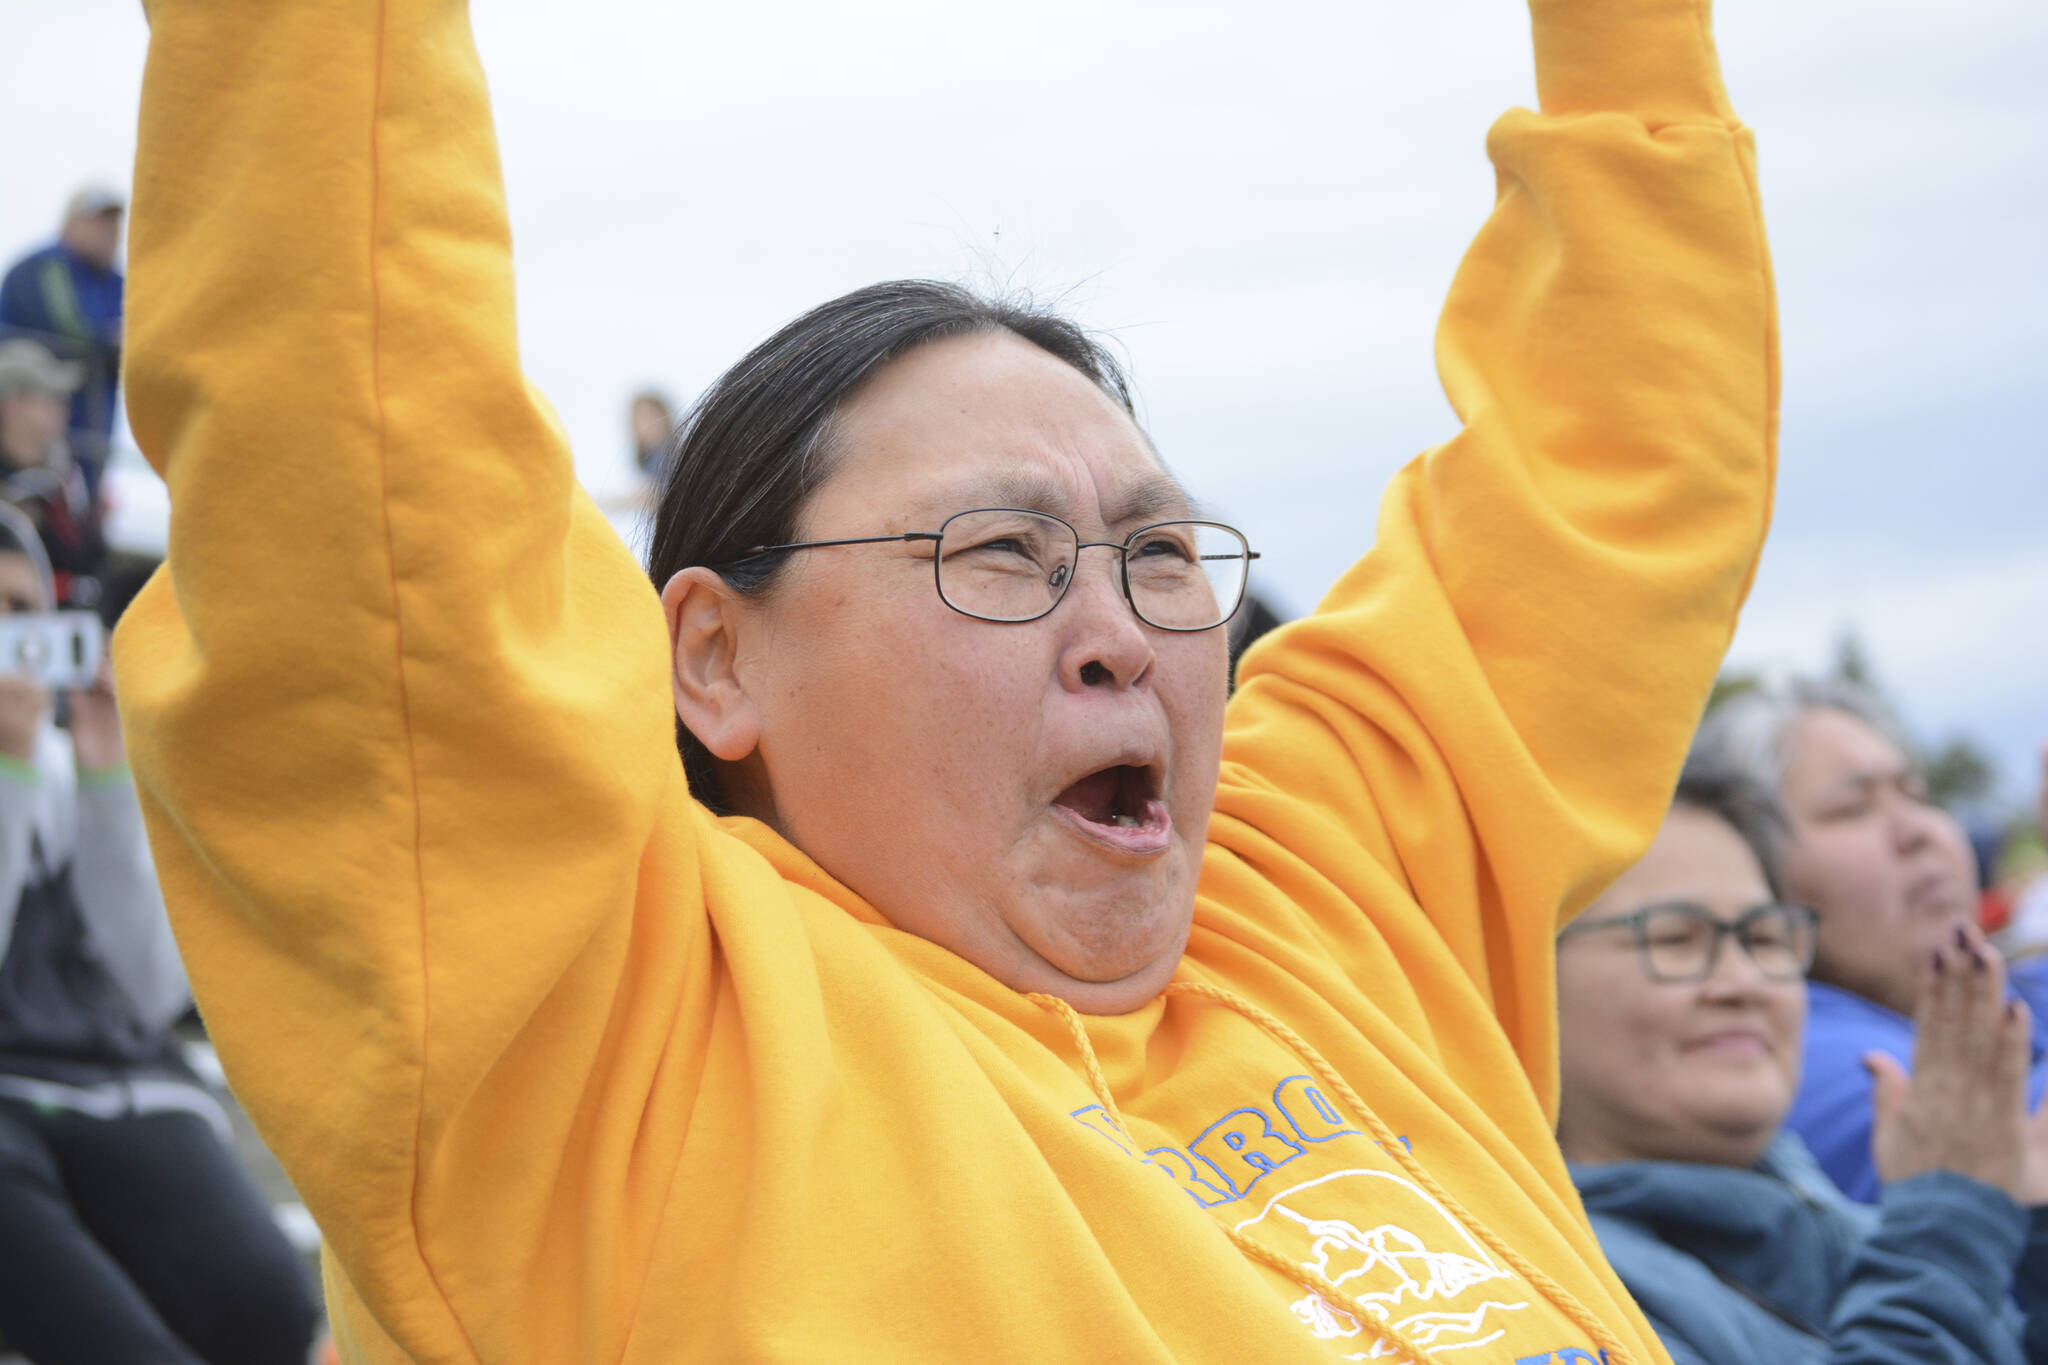 Stella Scott cheers as the Barrow Whalers of Utqiagvik make a touchdown on Friday, Sept. 16, 2022, at the Mariners vs. Whalers football game at Homer High School in Homer, Alaska. Scott lives in Homer, but her home town is Utqiagvik and she came to support the team with visiting residents from the farthest north Alaska city. (Photo by Michael Armstrong/Homer News)